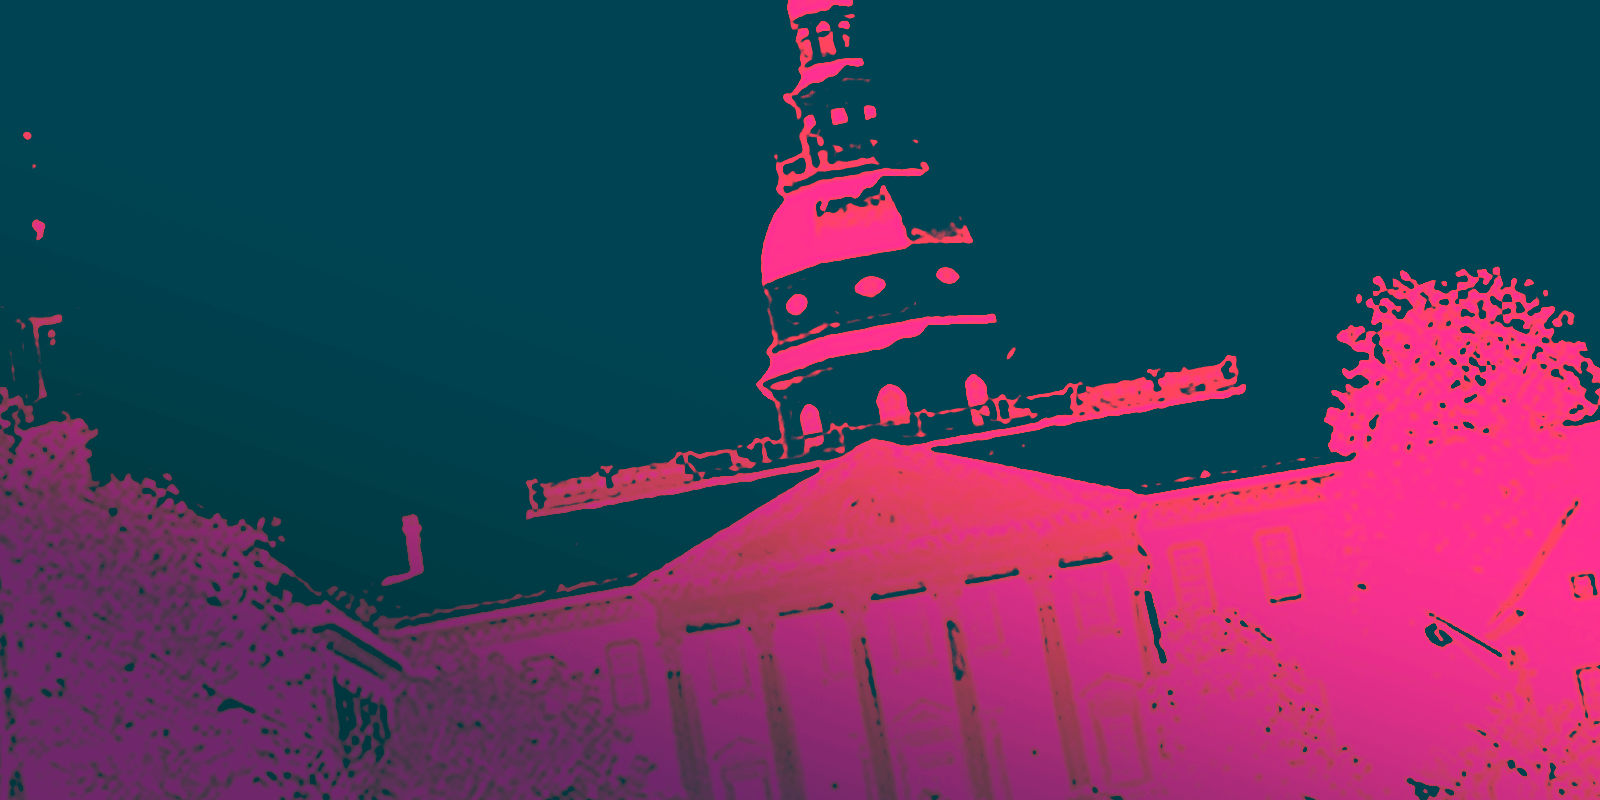 Maryland State House with a magenta filter and dark green background.